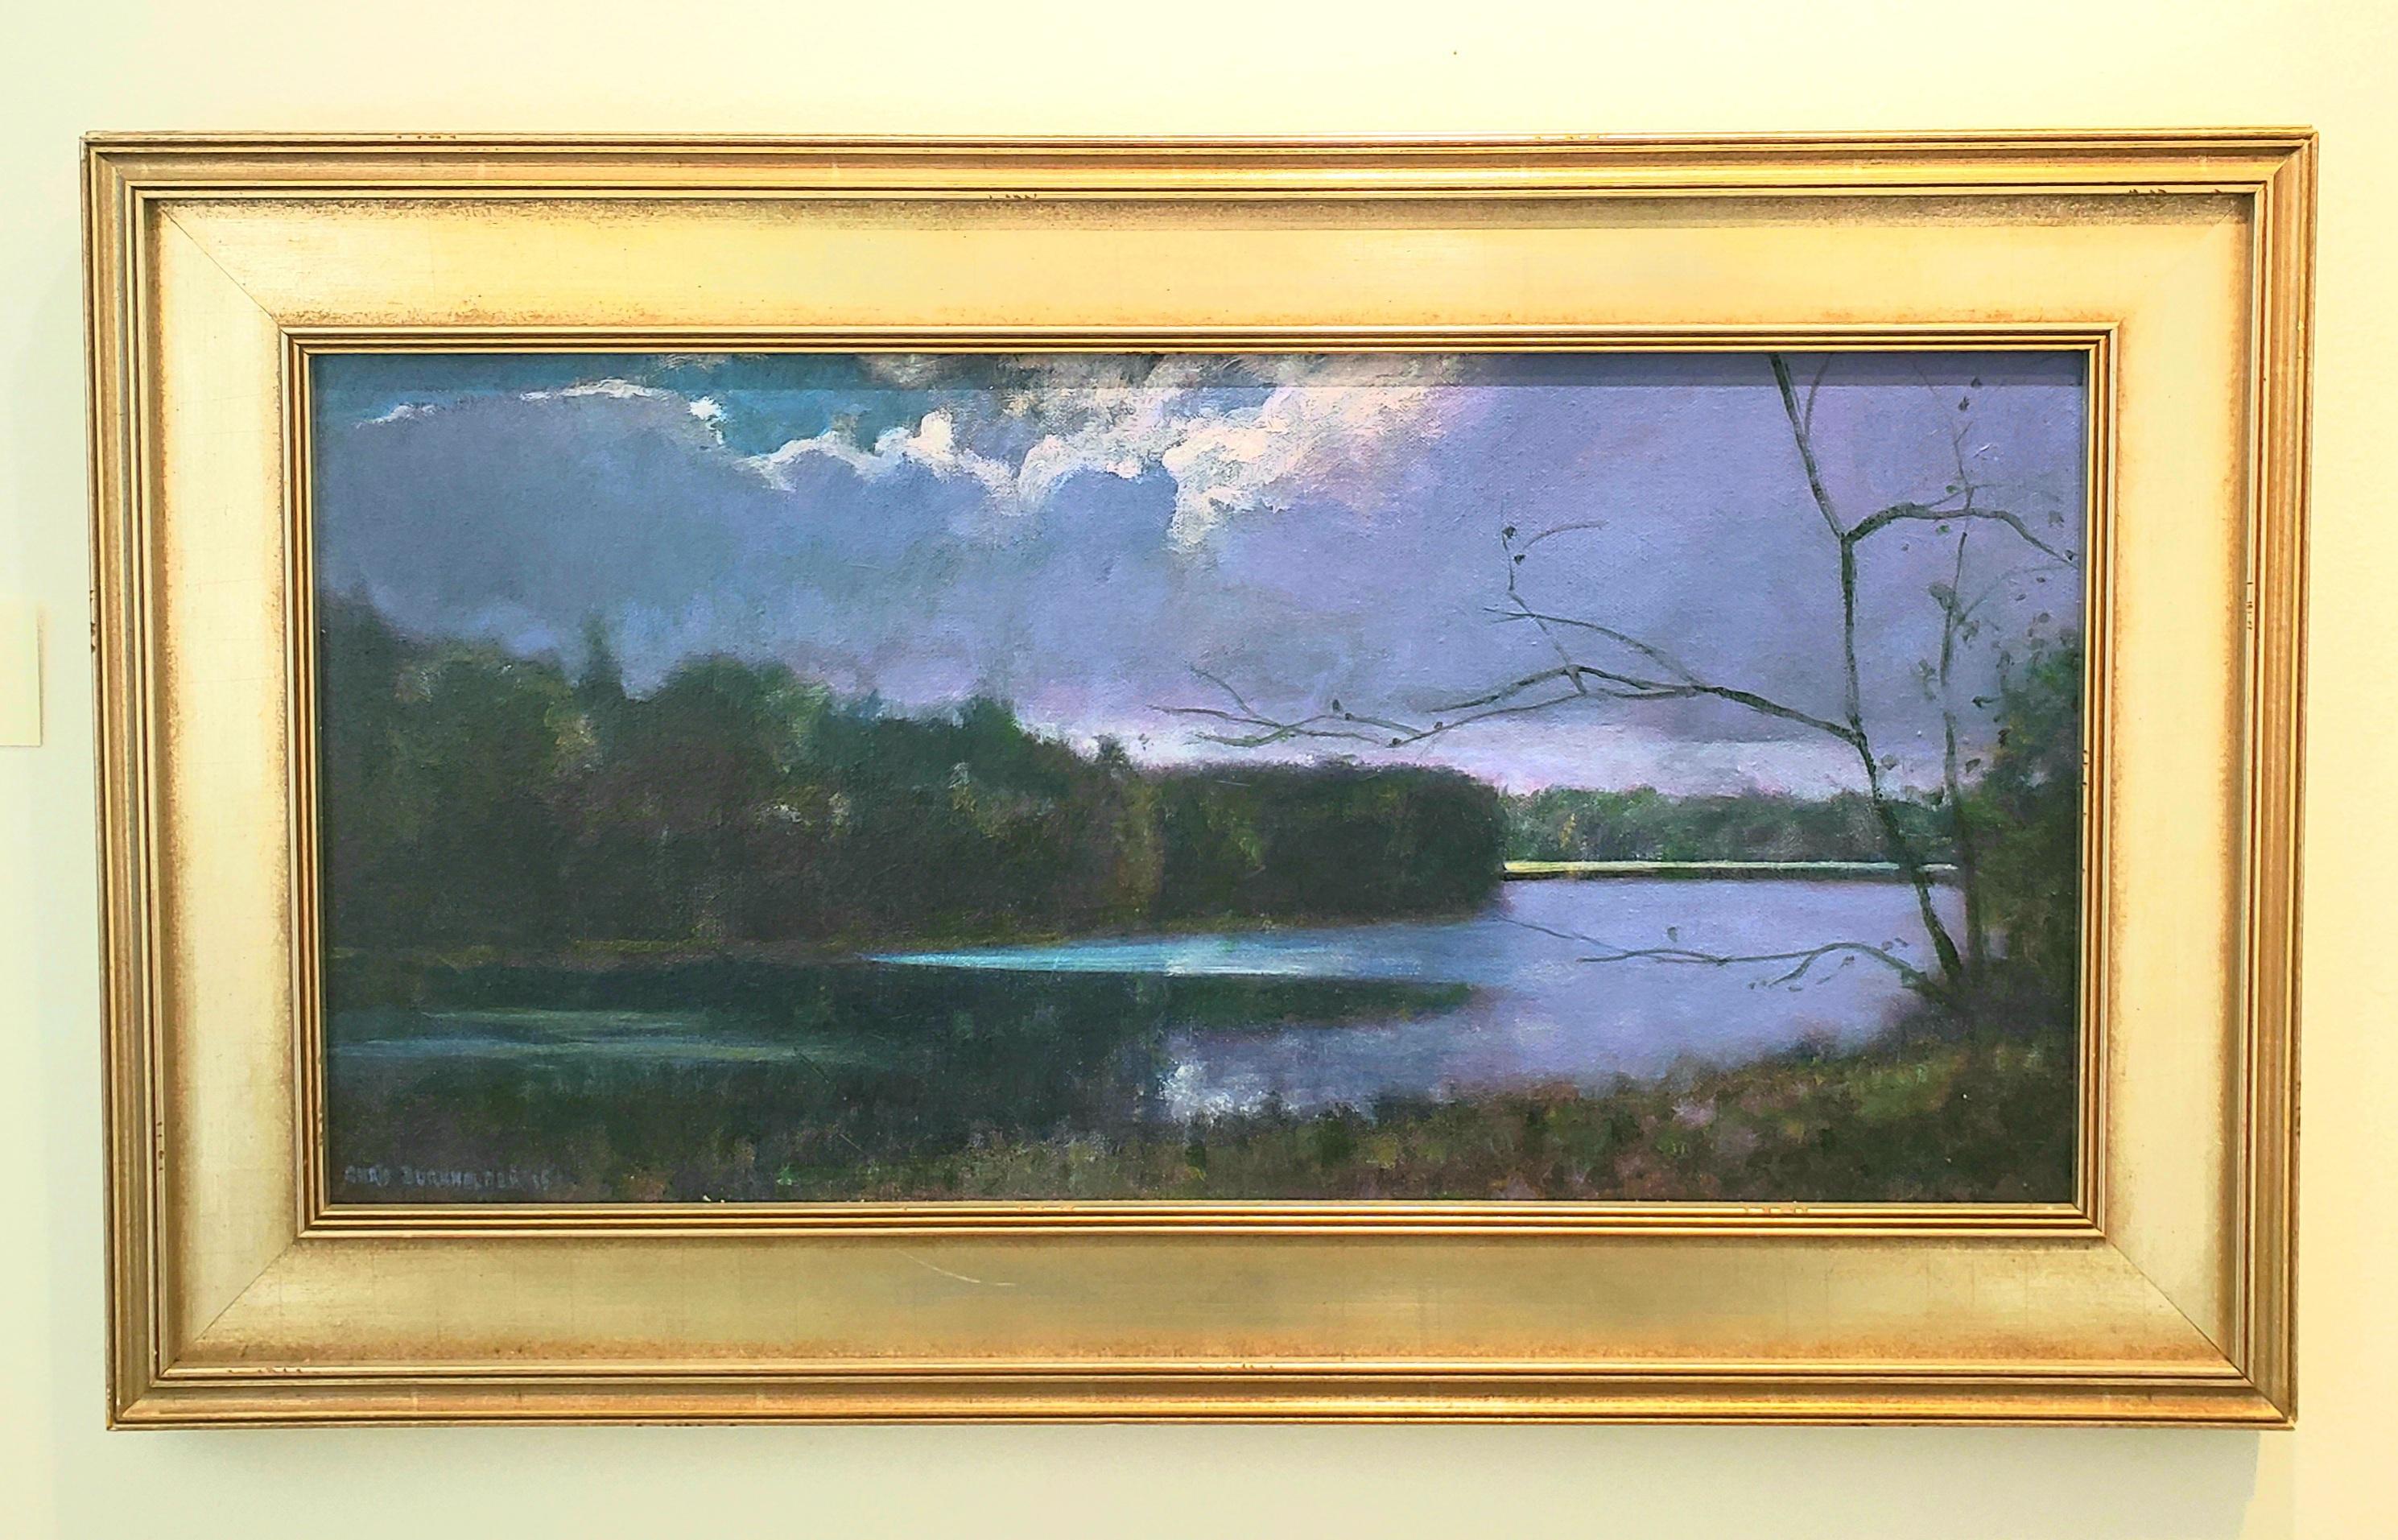  Lake Raven, American Luminism, Texas Landscapes, Ethereal Landscapes - Painting by Chris Burkholder